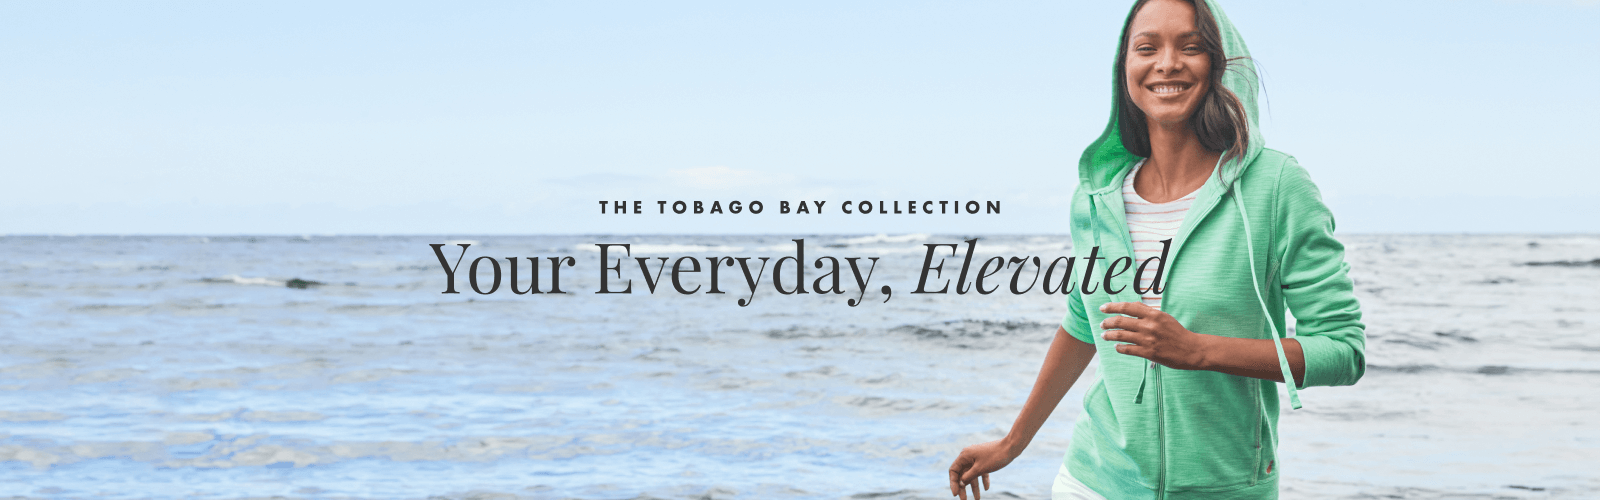 The Tobago Bay Collection: Your Everyday, Elevated